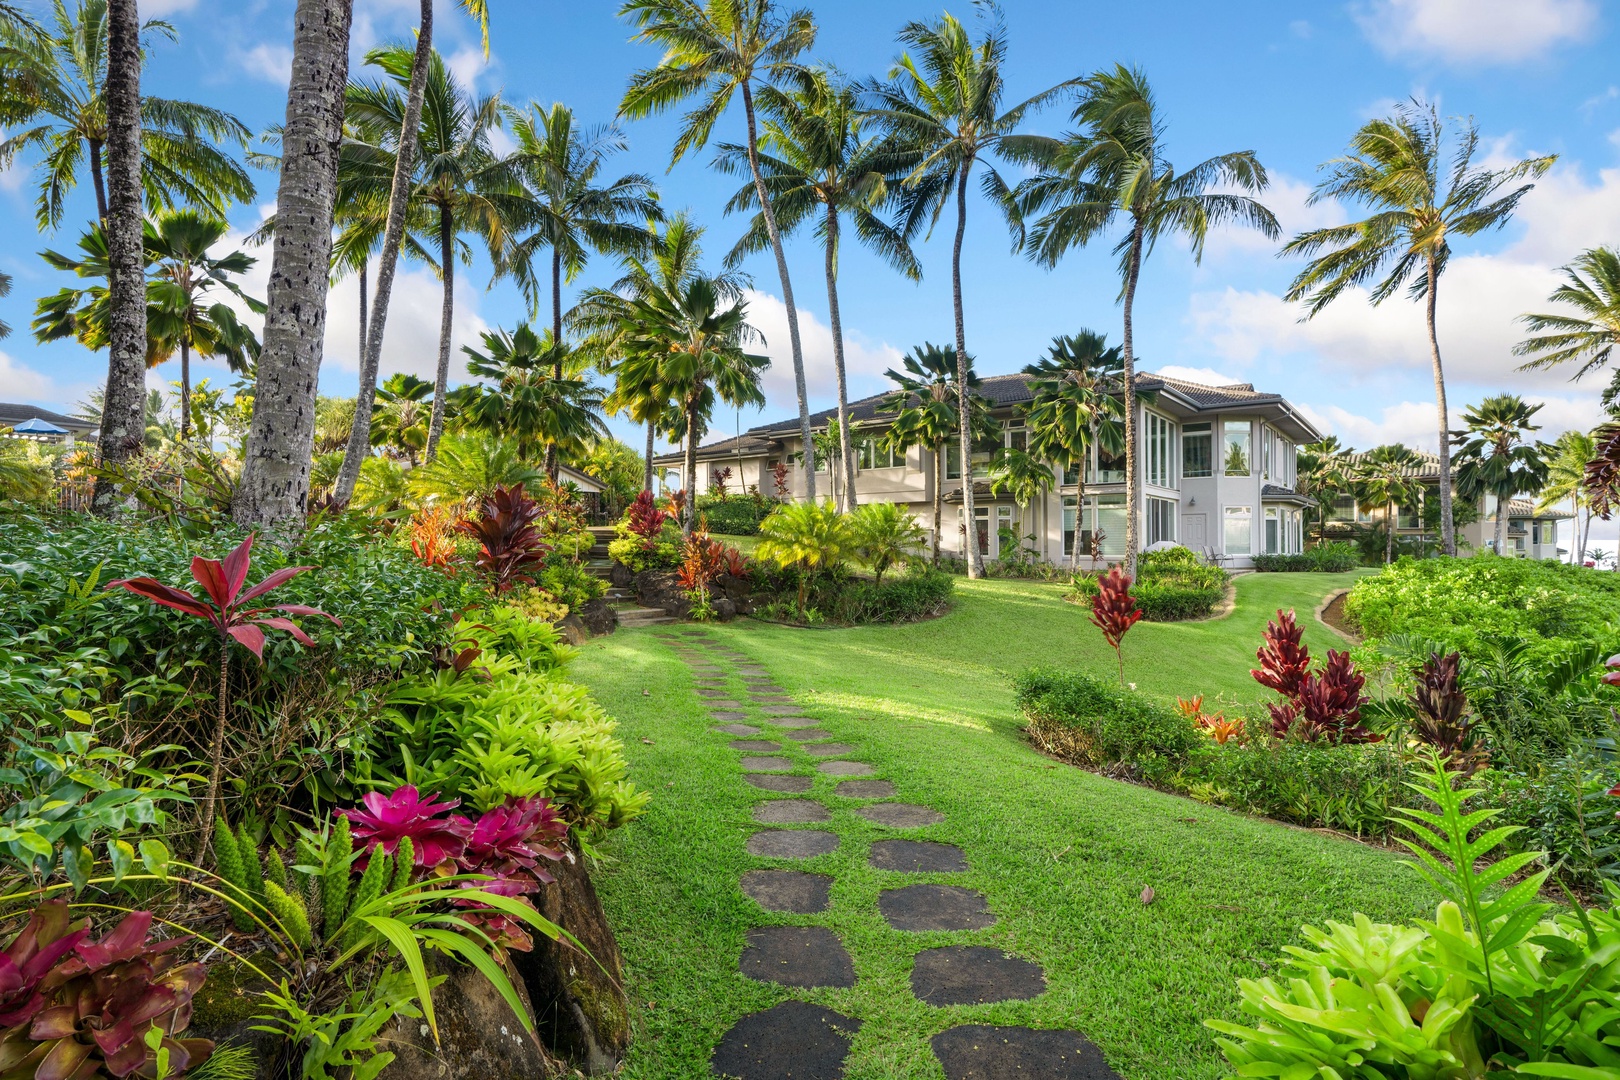 Princeville Vacation Rentals, Tropical Elegance - A winding stone path leads you through a meticulously manicured garden, adorned with vibrant blooms and towering palm trees.